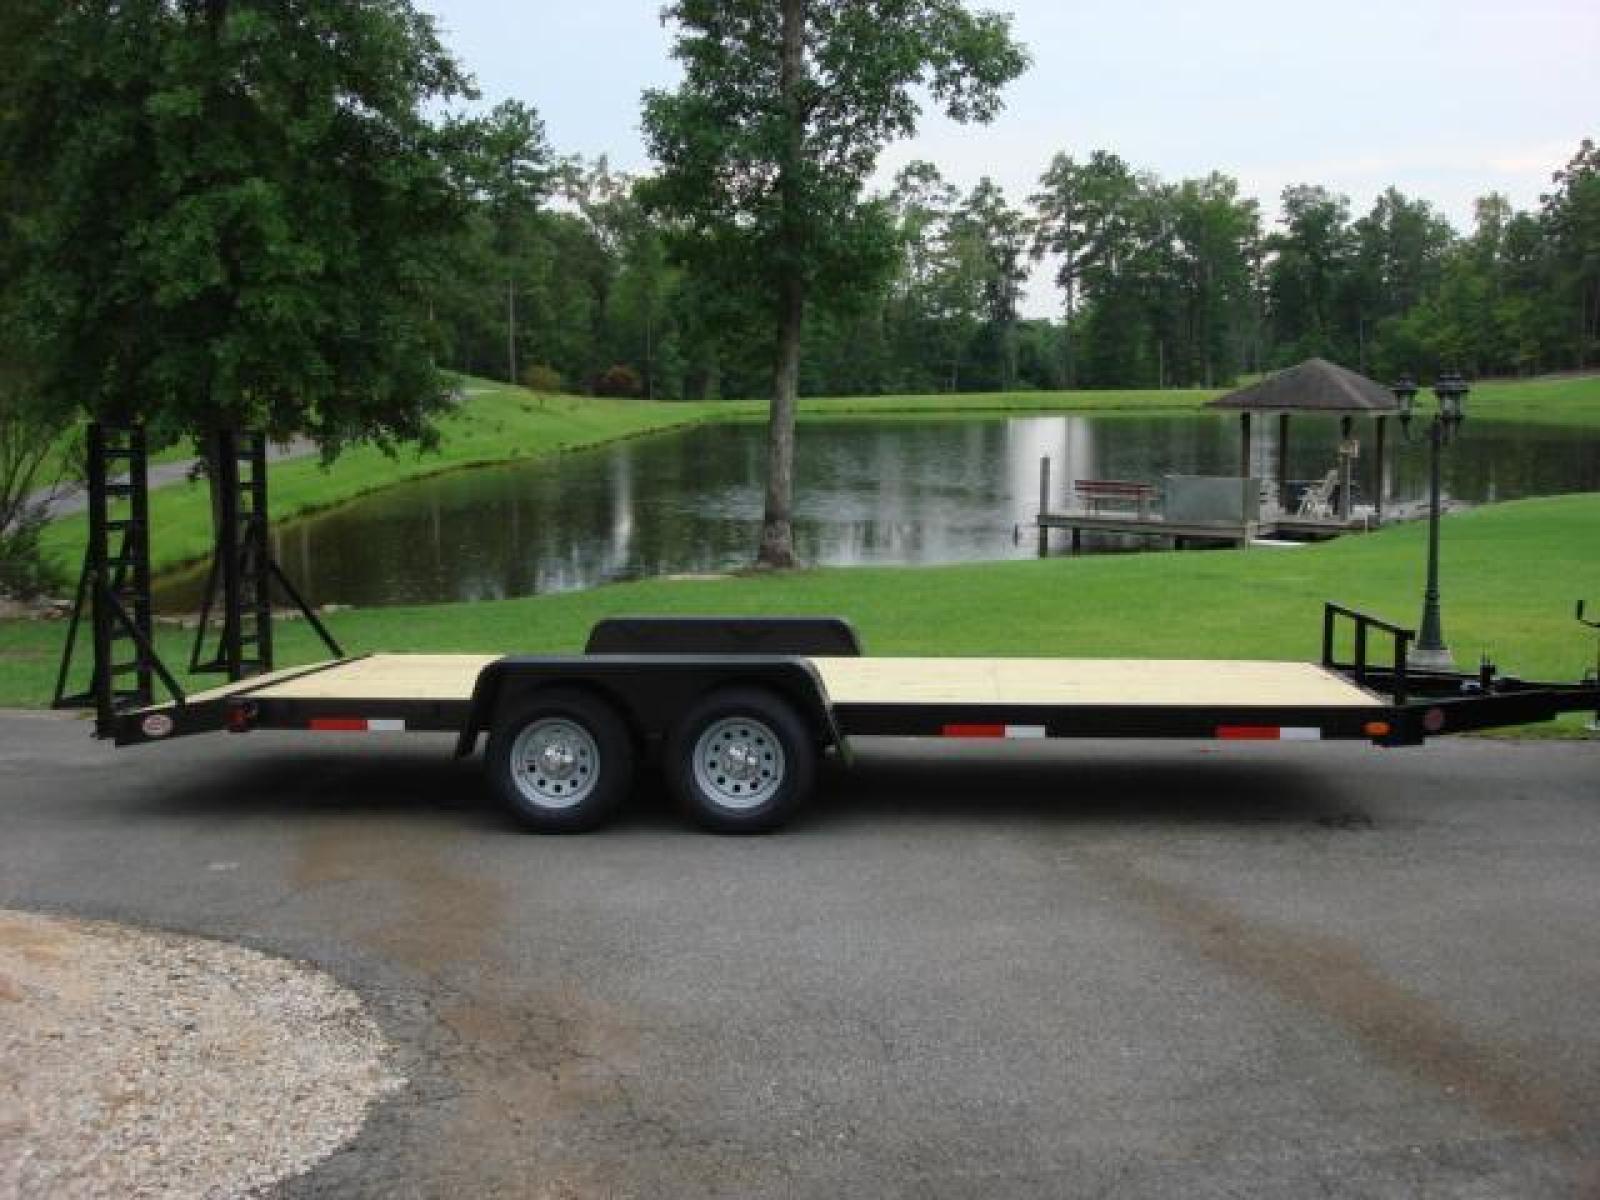 2022 Black Macon Custom Flatbed & Equipment , located at 1330 Rainey Rd., Macon, 31220, (478) 960-1044, 32.845638, -83.778687 - Hurry Close Out Priced to Sell! Brand New 7ft X 20ft Long, Including the Beaver Tail Flatbed Equipment Trailer. 3.5 Ton Heavy Duty Tractor, Equipment or Car Hauling Trailer. 6" Channel Iron Main frame! Most Companies Use a 5" Channel Iron Frame! Diamond Plate Steel Fenders are Heavy Duty! - Photo #1